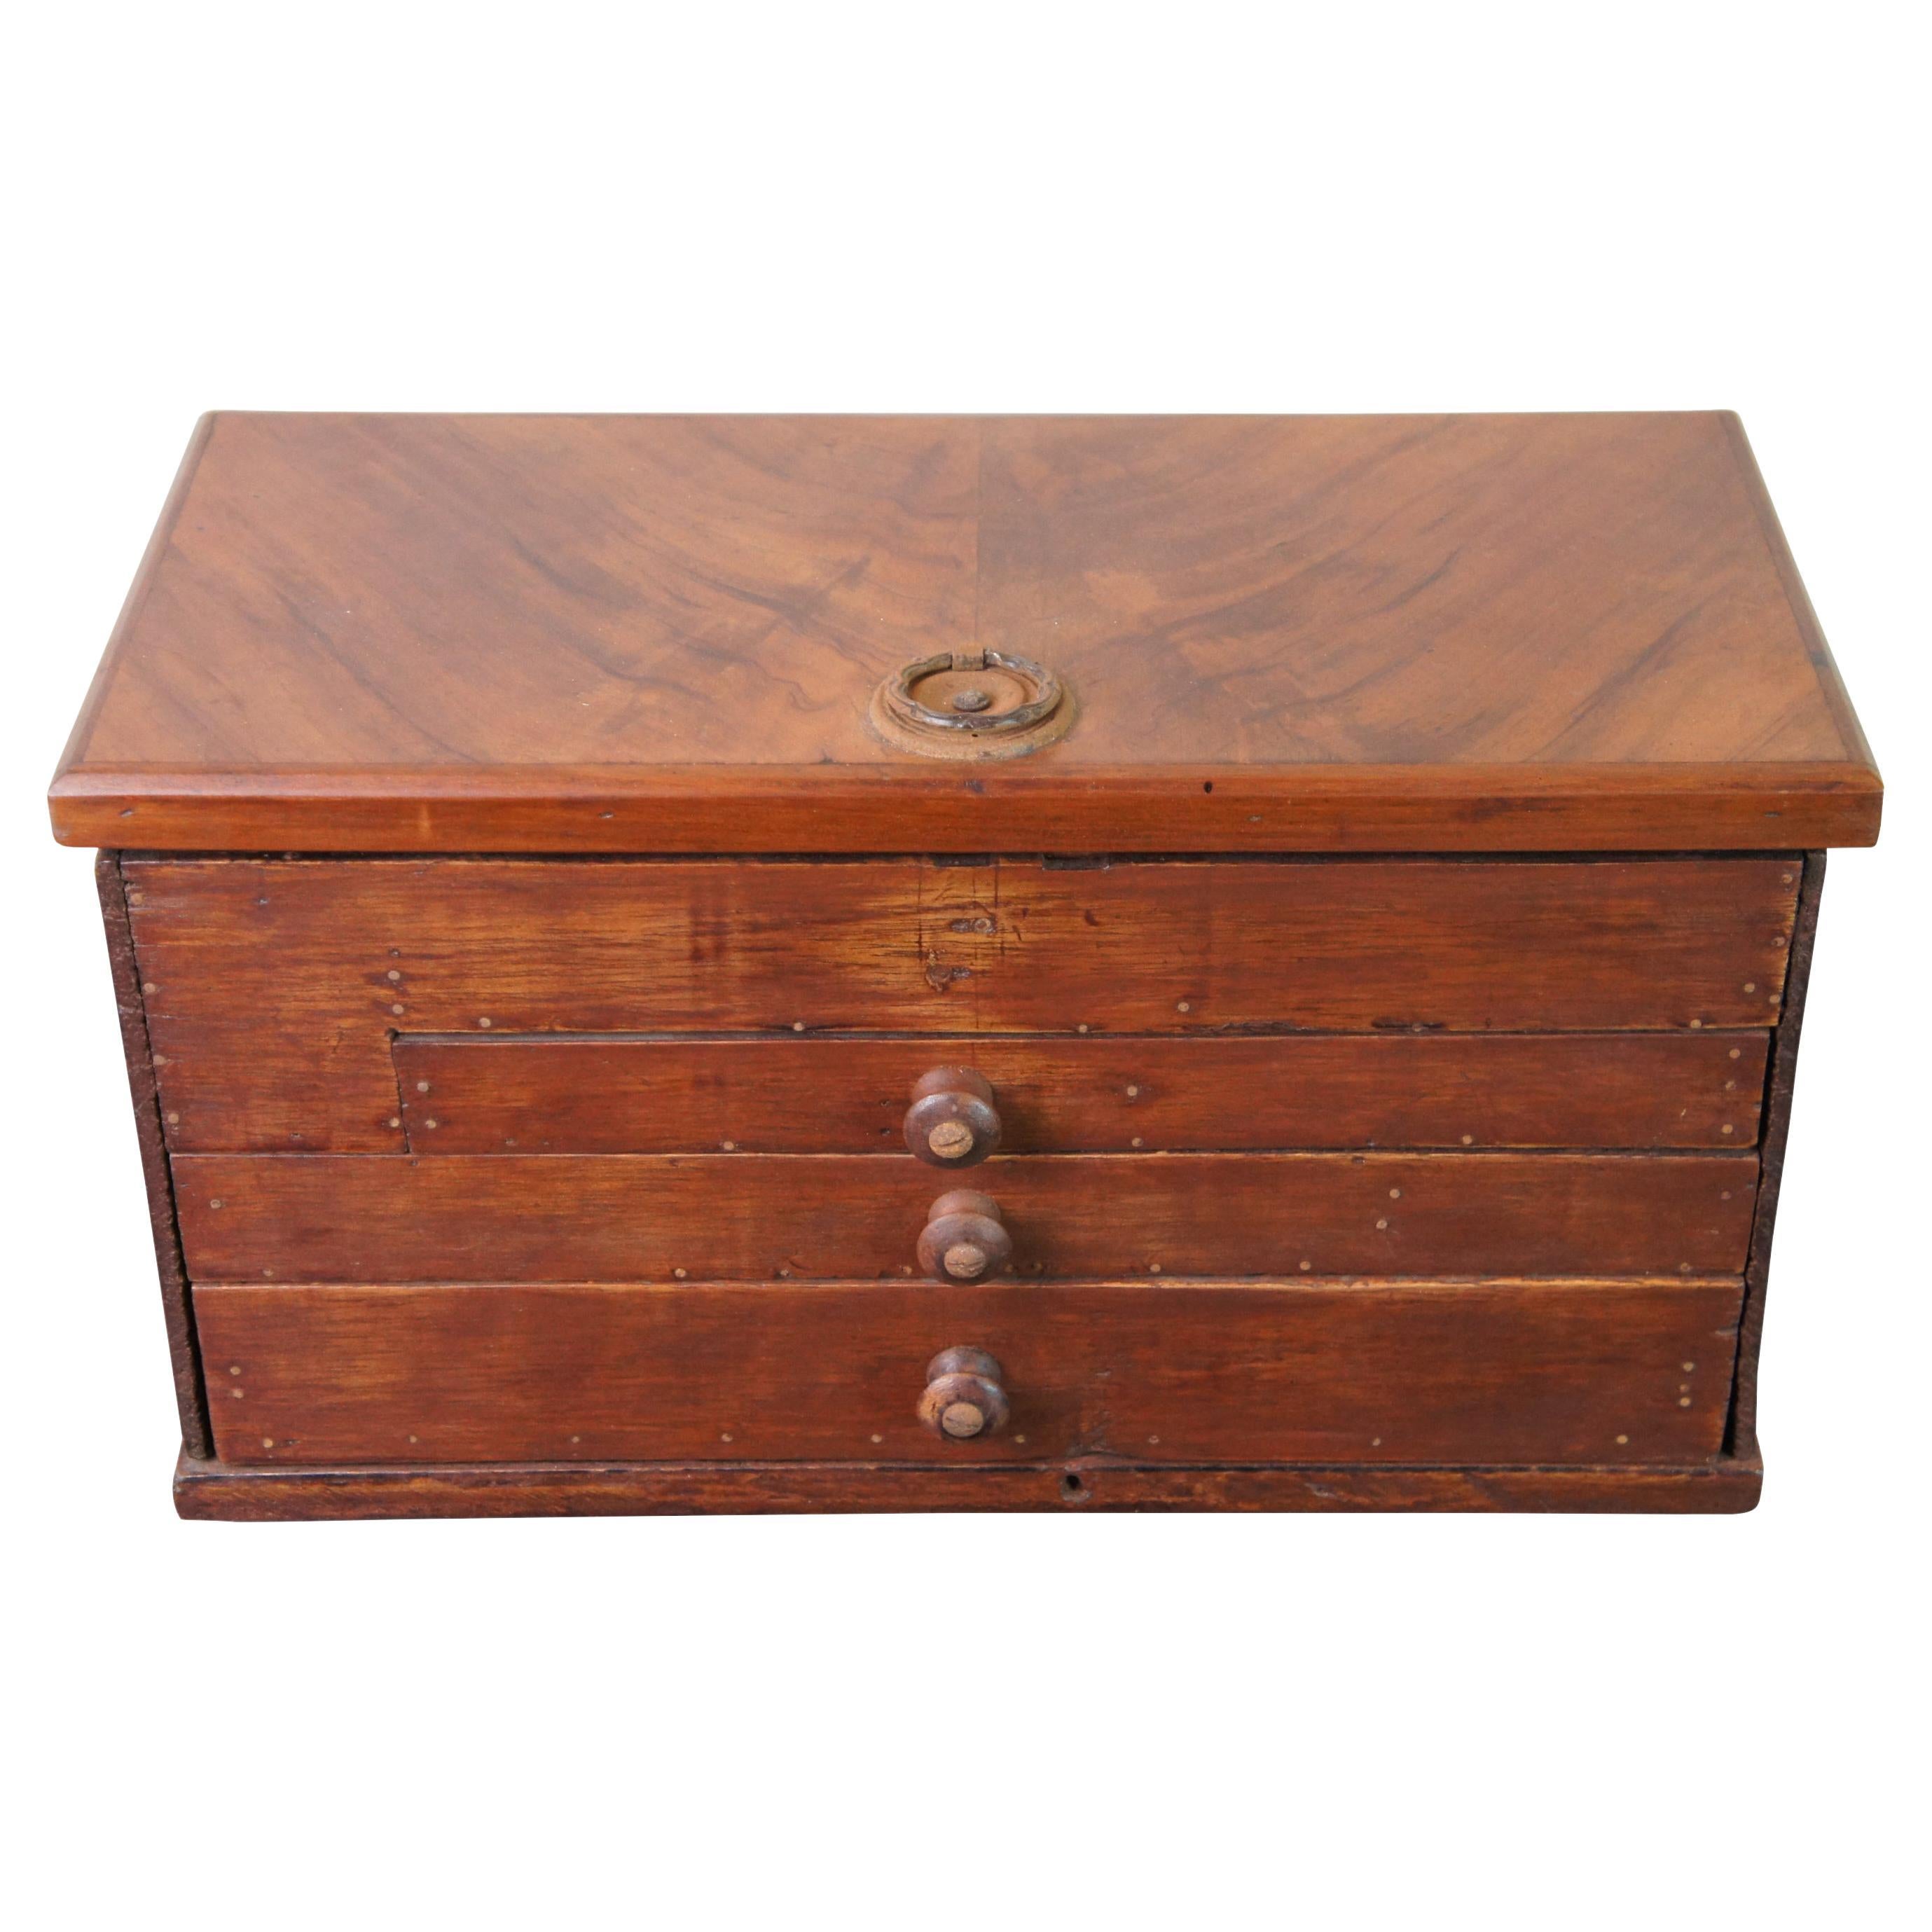 Antique Victorian apothecary machinist drafting or calligraphy tool box and accessories. Made from pine with a vibrant mahogany top. Features multiple drawer and compartments with lion head handles. Many drafting tools, old ink bottles and etc